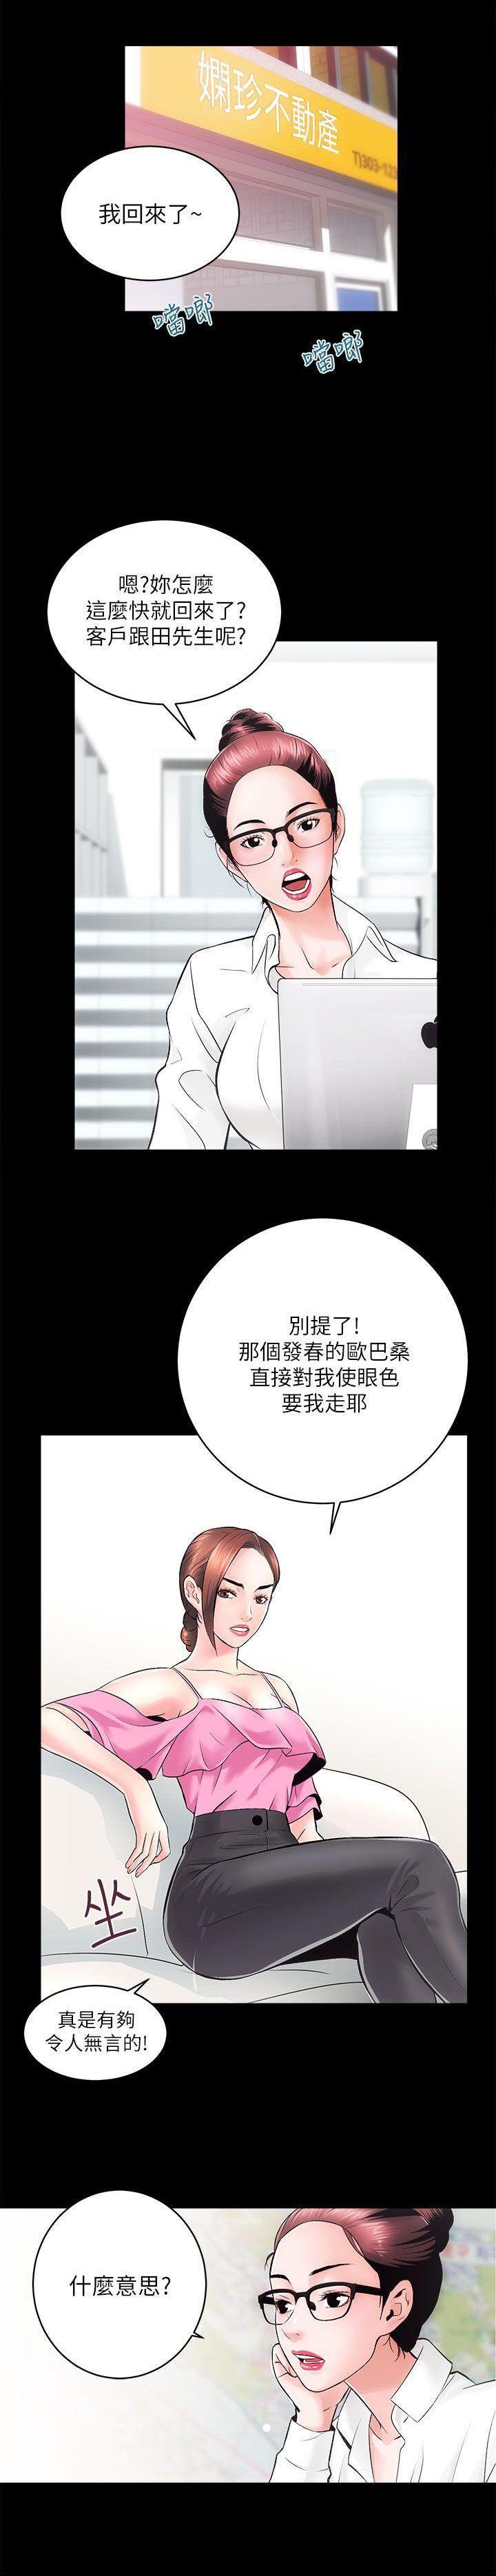 Real 性溢房屋 Chapter 5-8 Sislovesme - Page 11